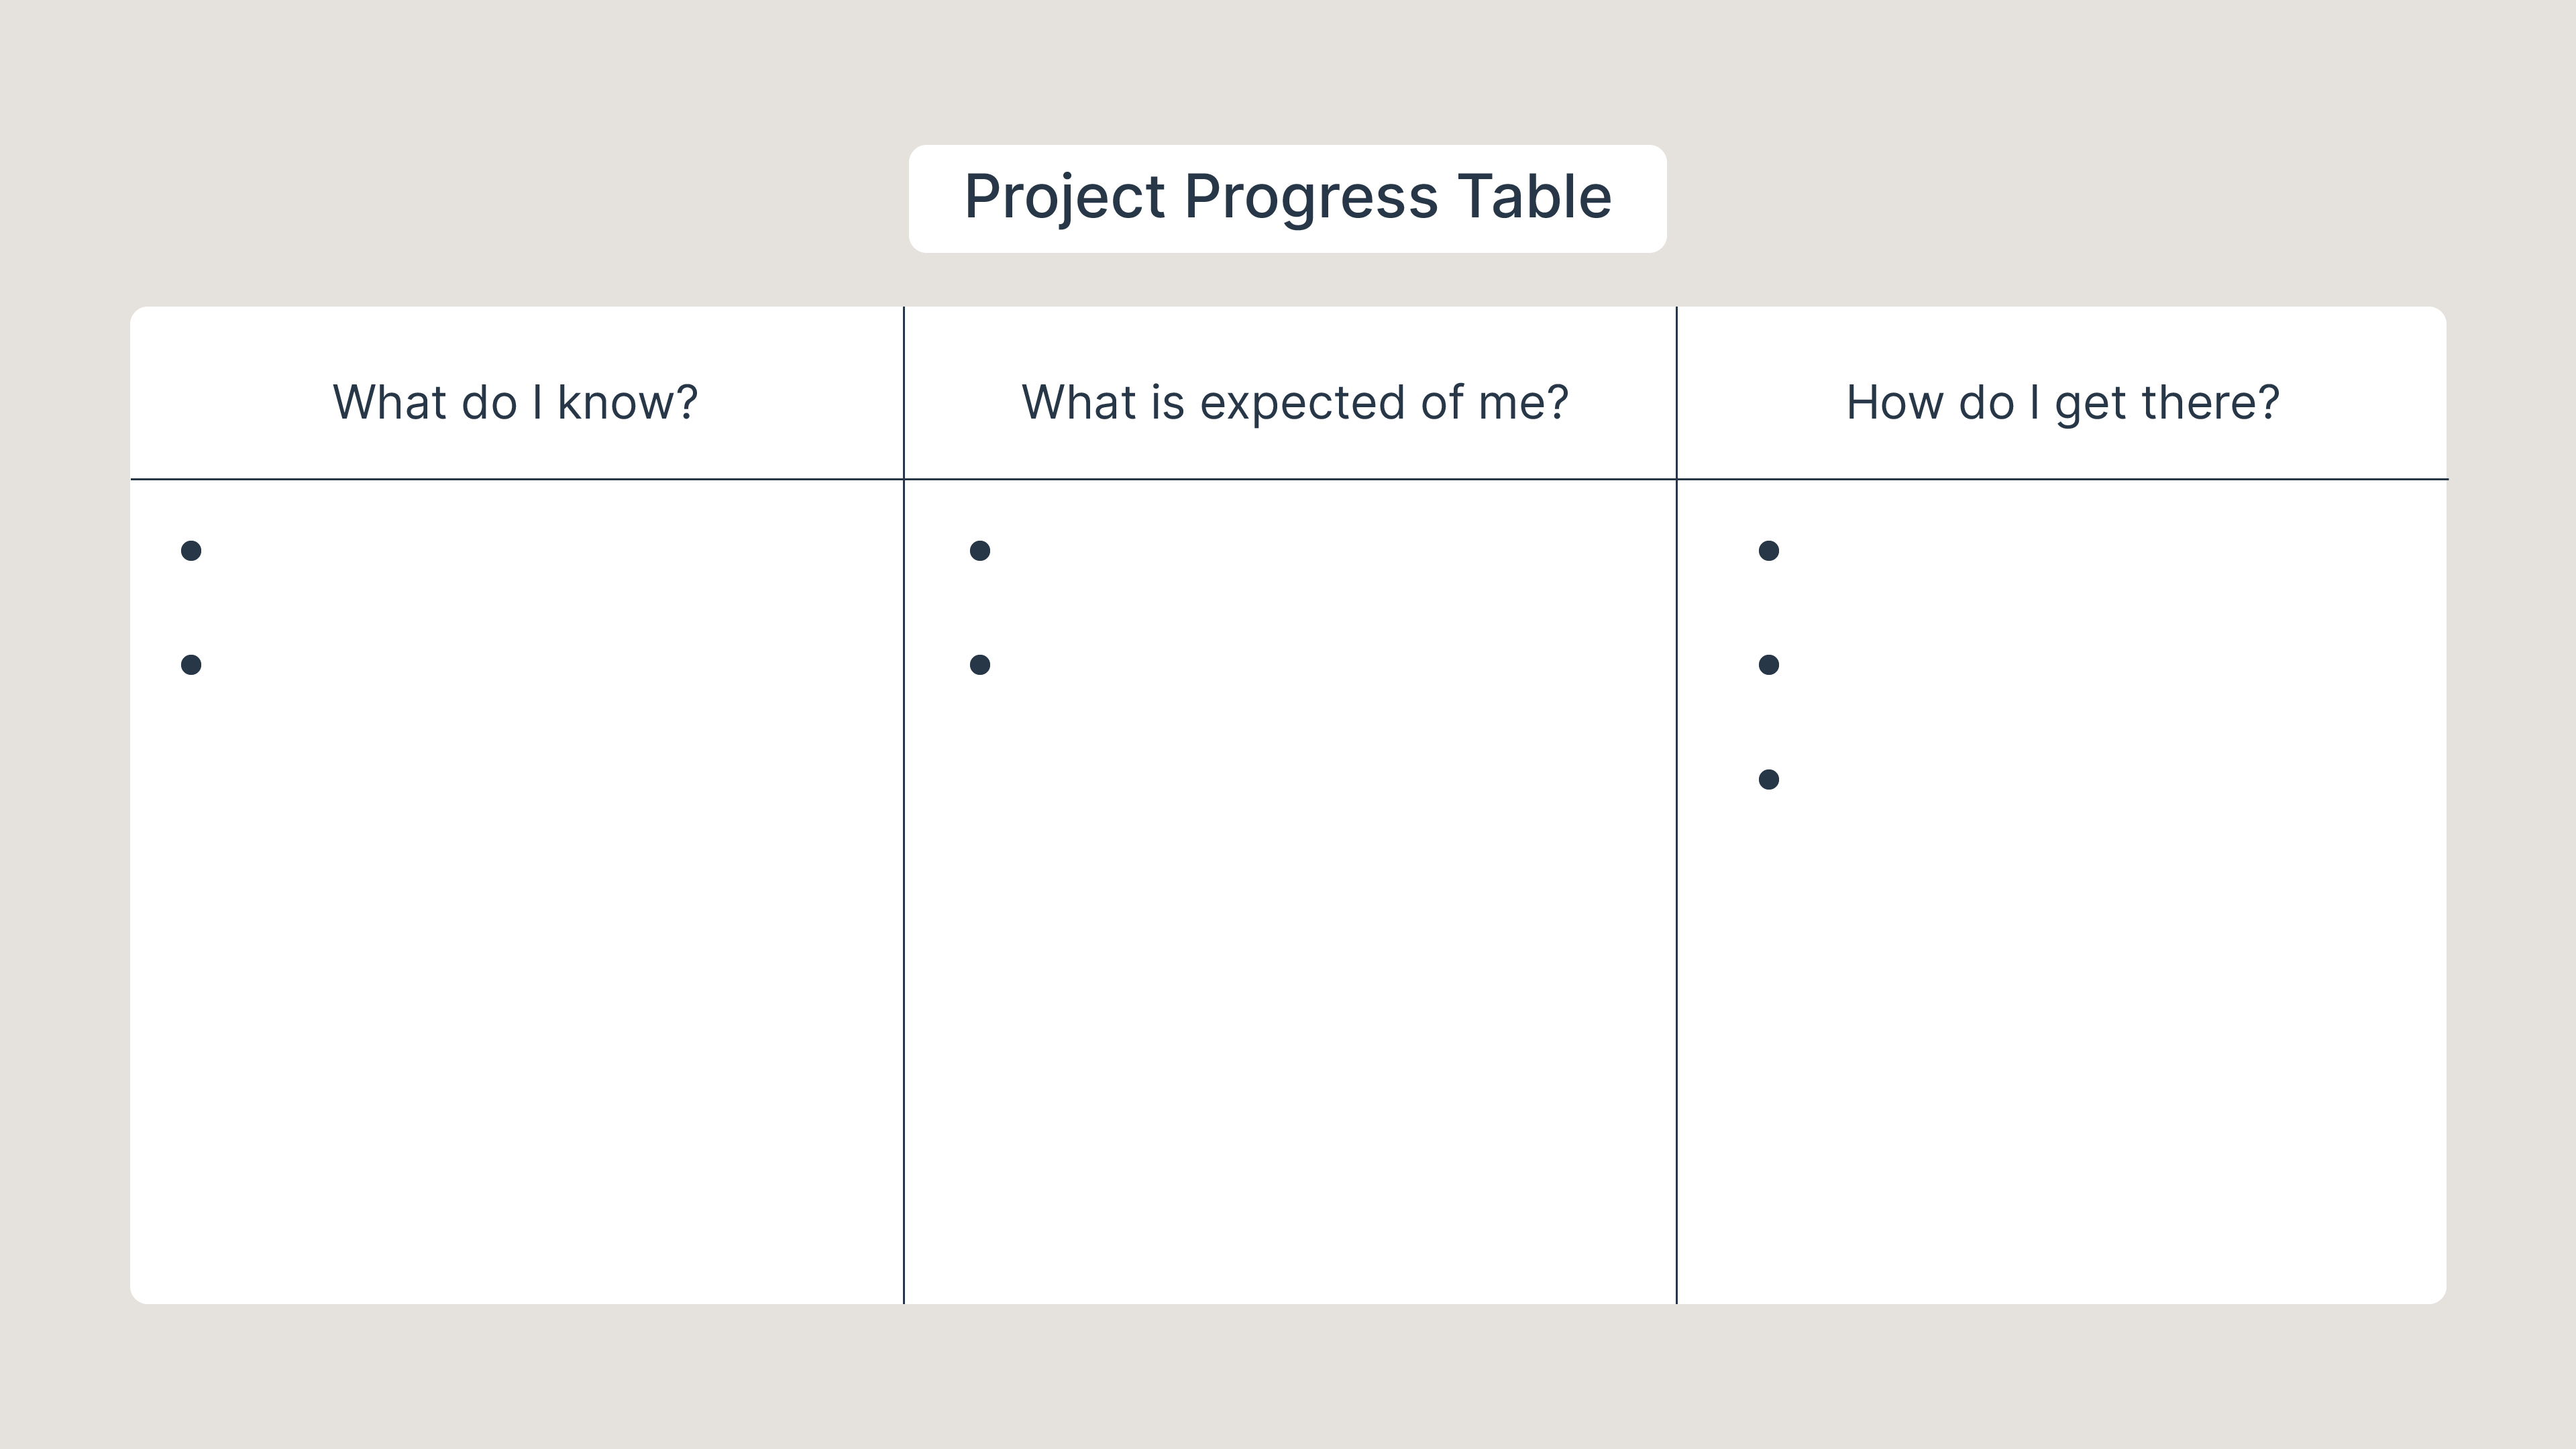 Project progress table divided into 3 columns, the headers of which are: what do I know, What is expected of me, How do I get there.